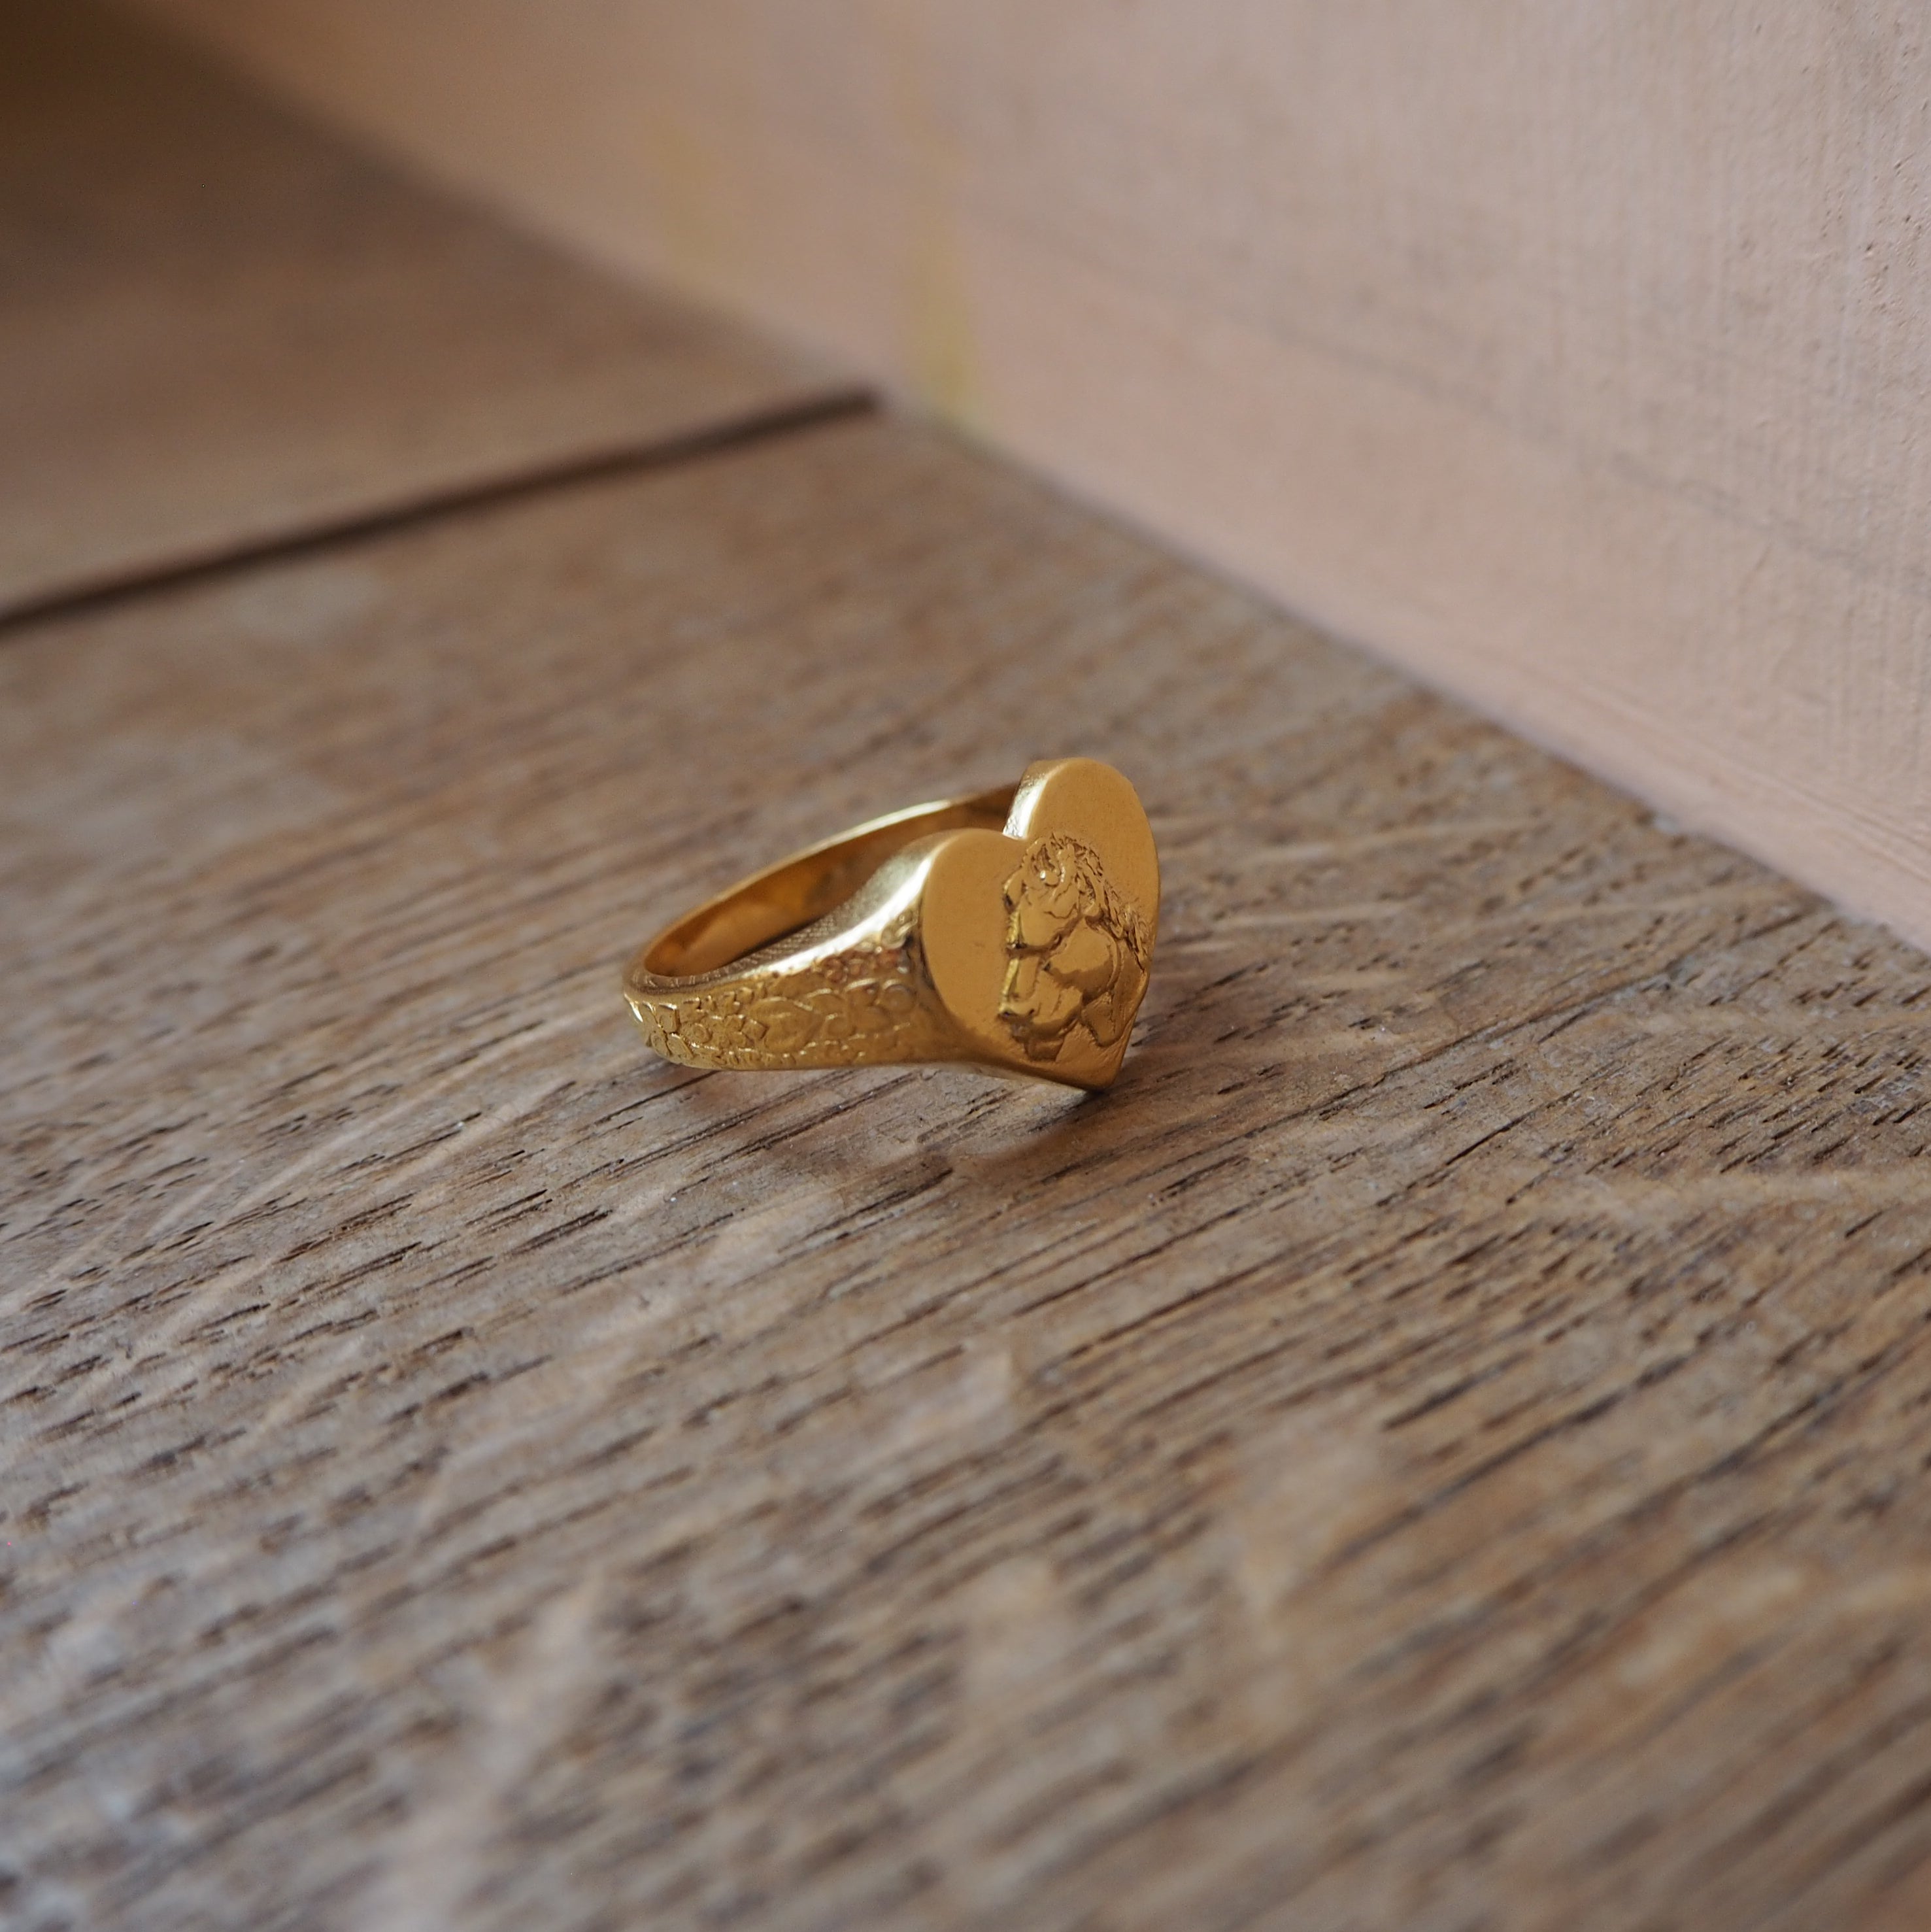 LIONESS HEART SIGNET RING